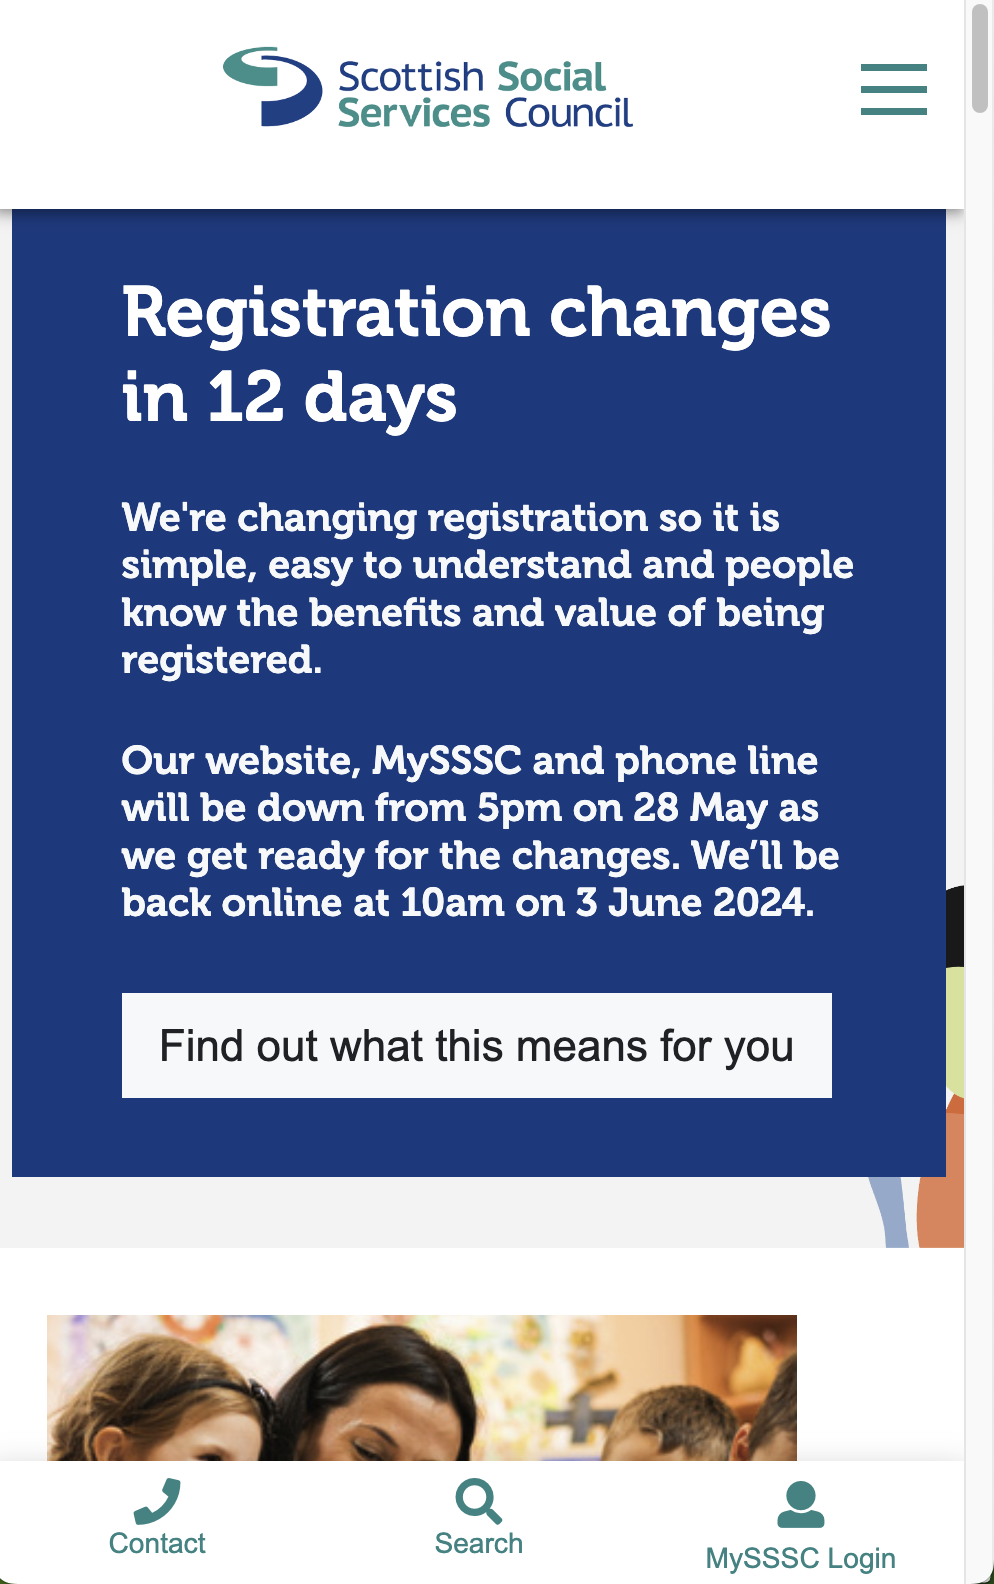 This image shows the MySSSC login button in mobile view which is located in the bottom right hand side of the screen.